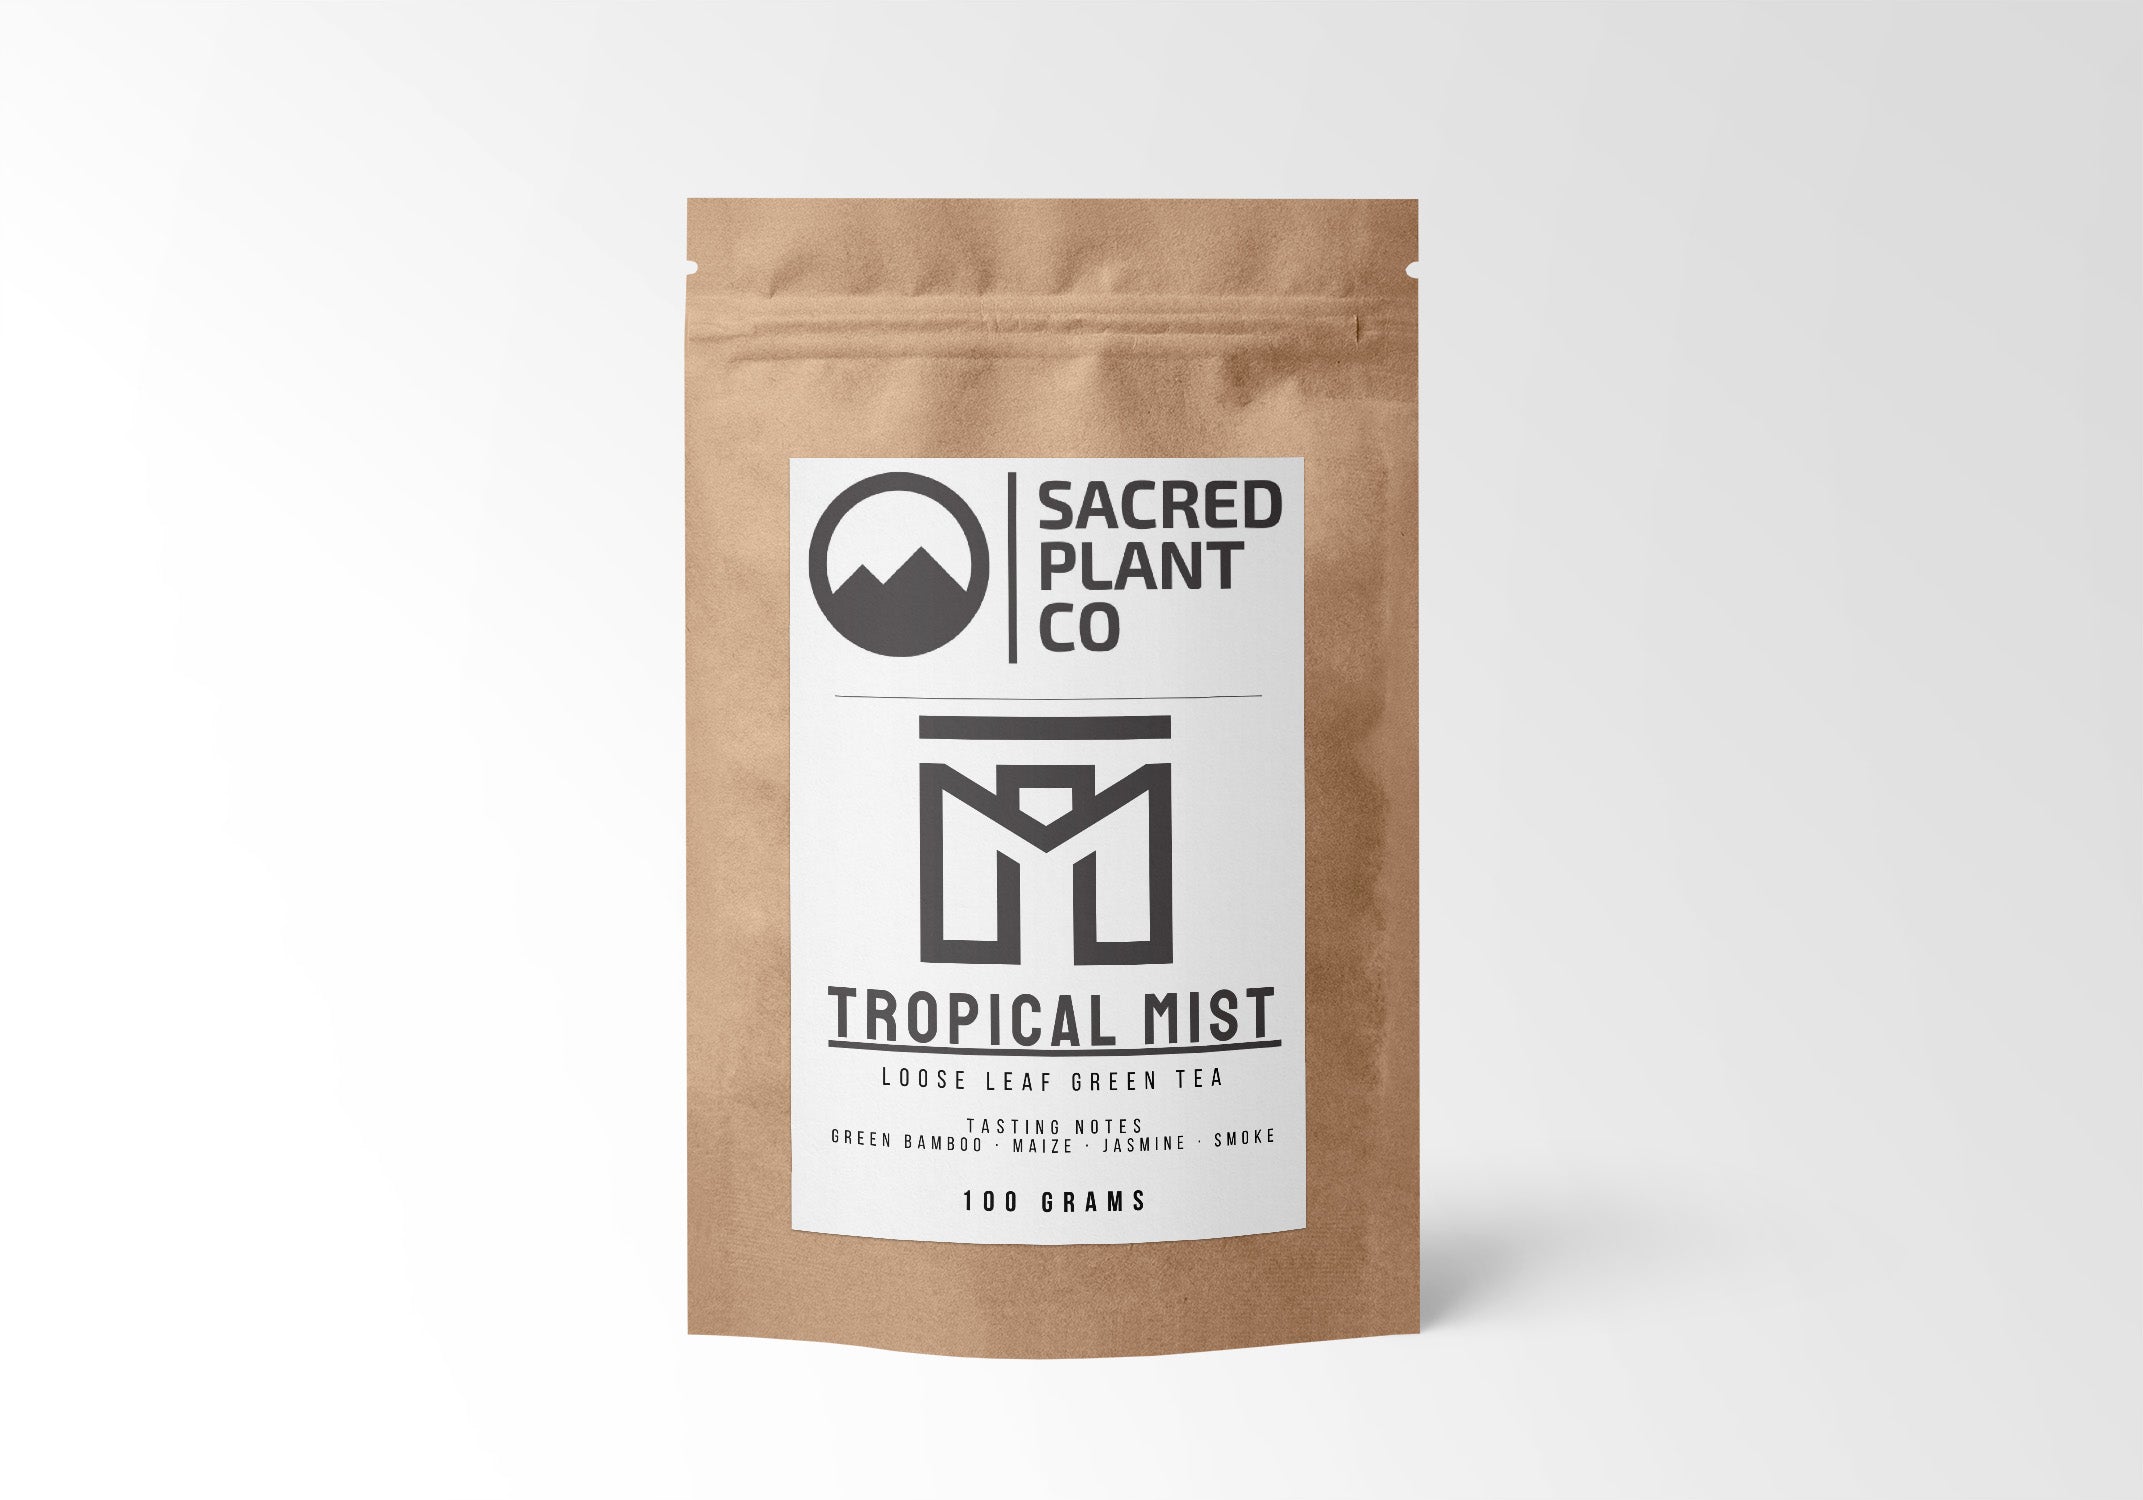 acred Plant Co presents a 100-gram bag of Tropical Mist, a loose leaf green tea blend with a light, sweet profile and aromatic notes.